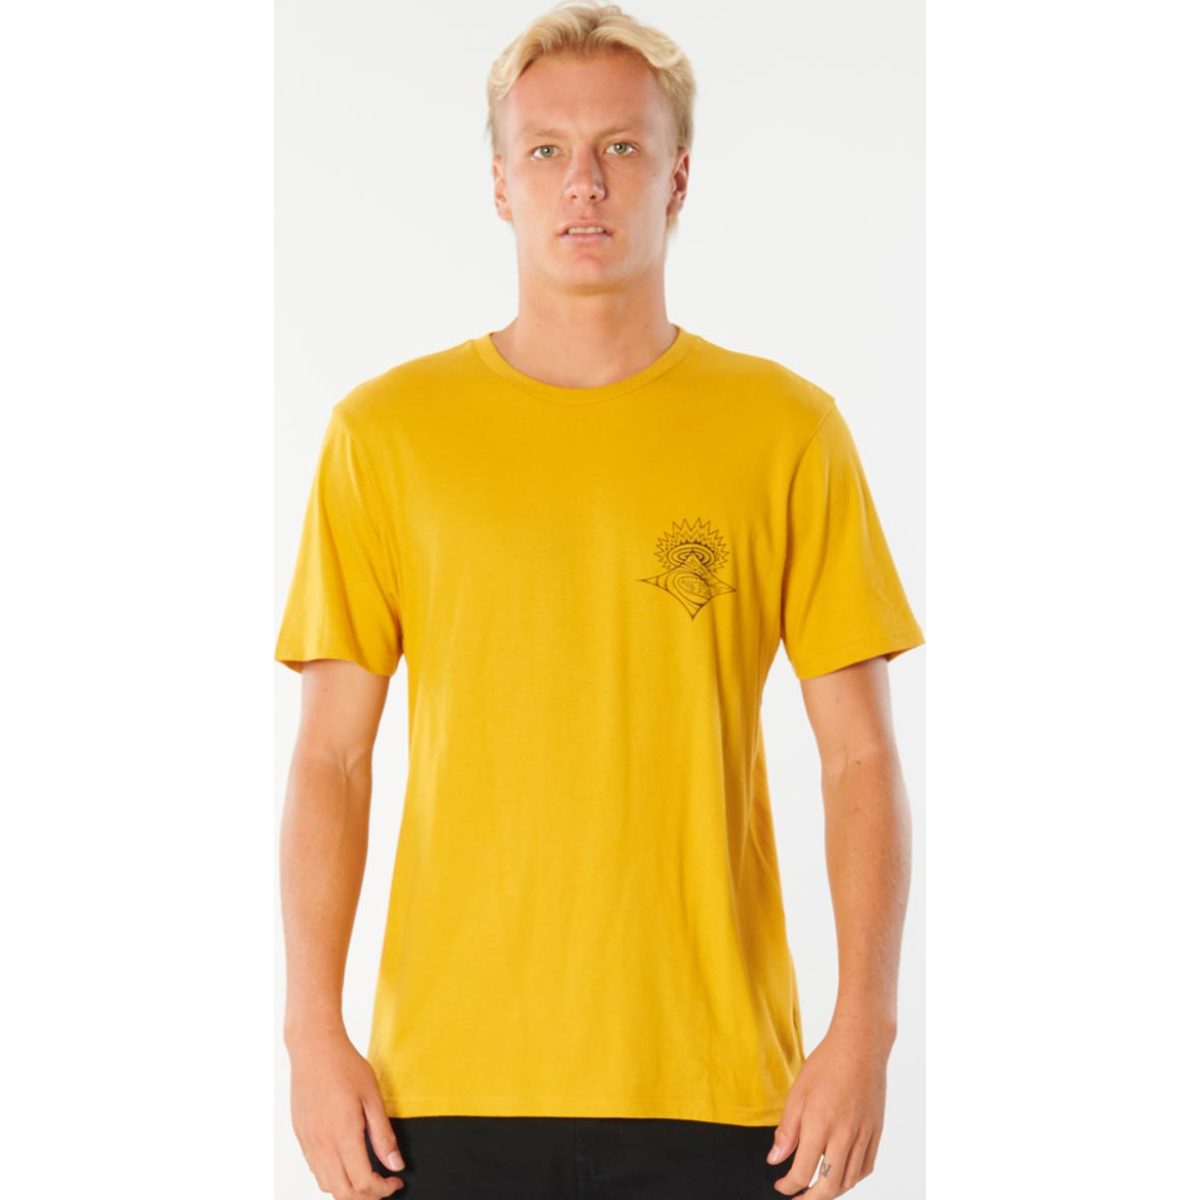 Scorched Earth Tee in Mustard